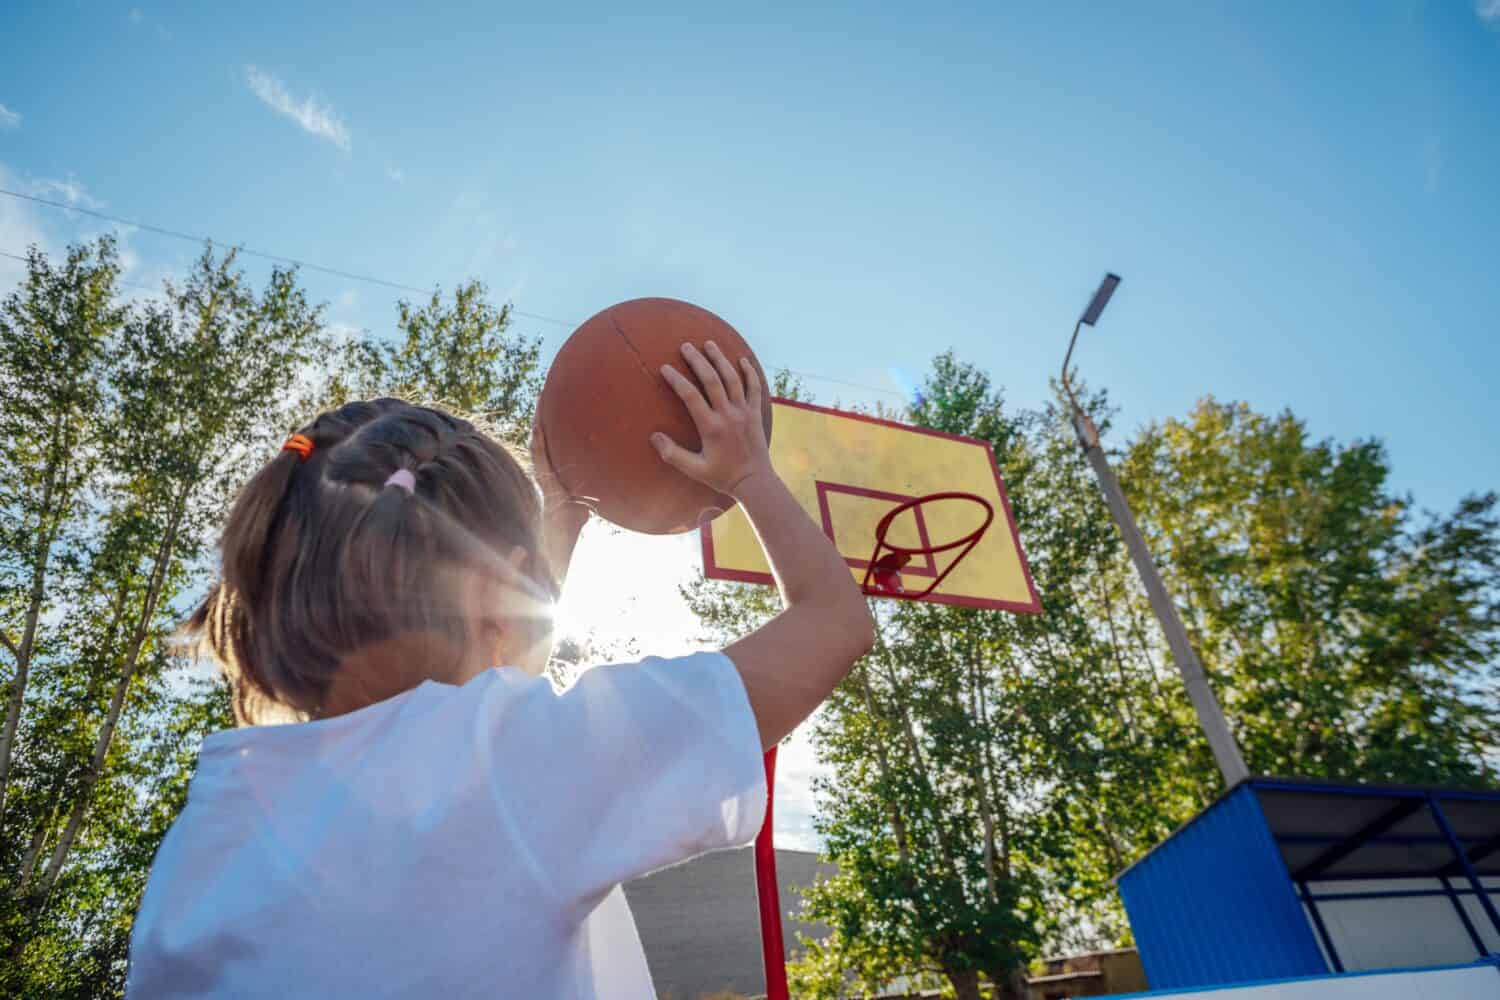 Golden Hour Glory: A Girl's Basketball Passion Shines Bright in the Sunset